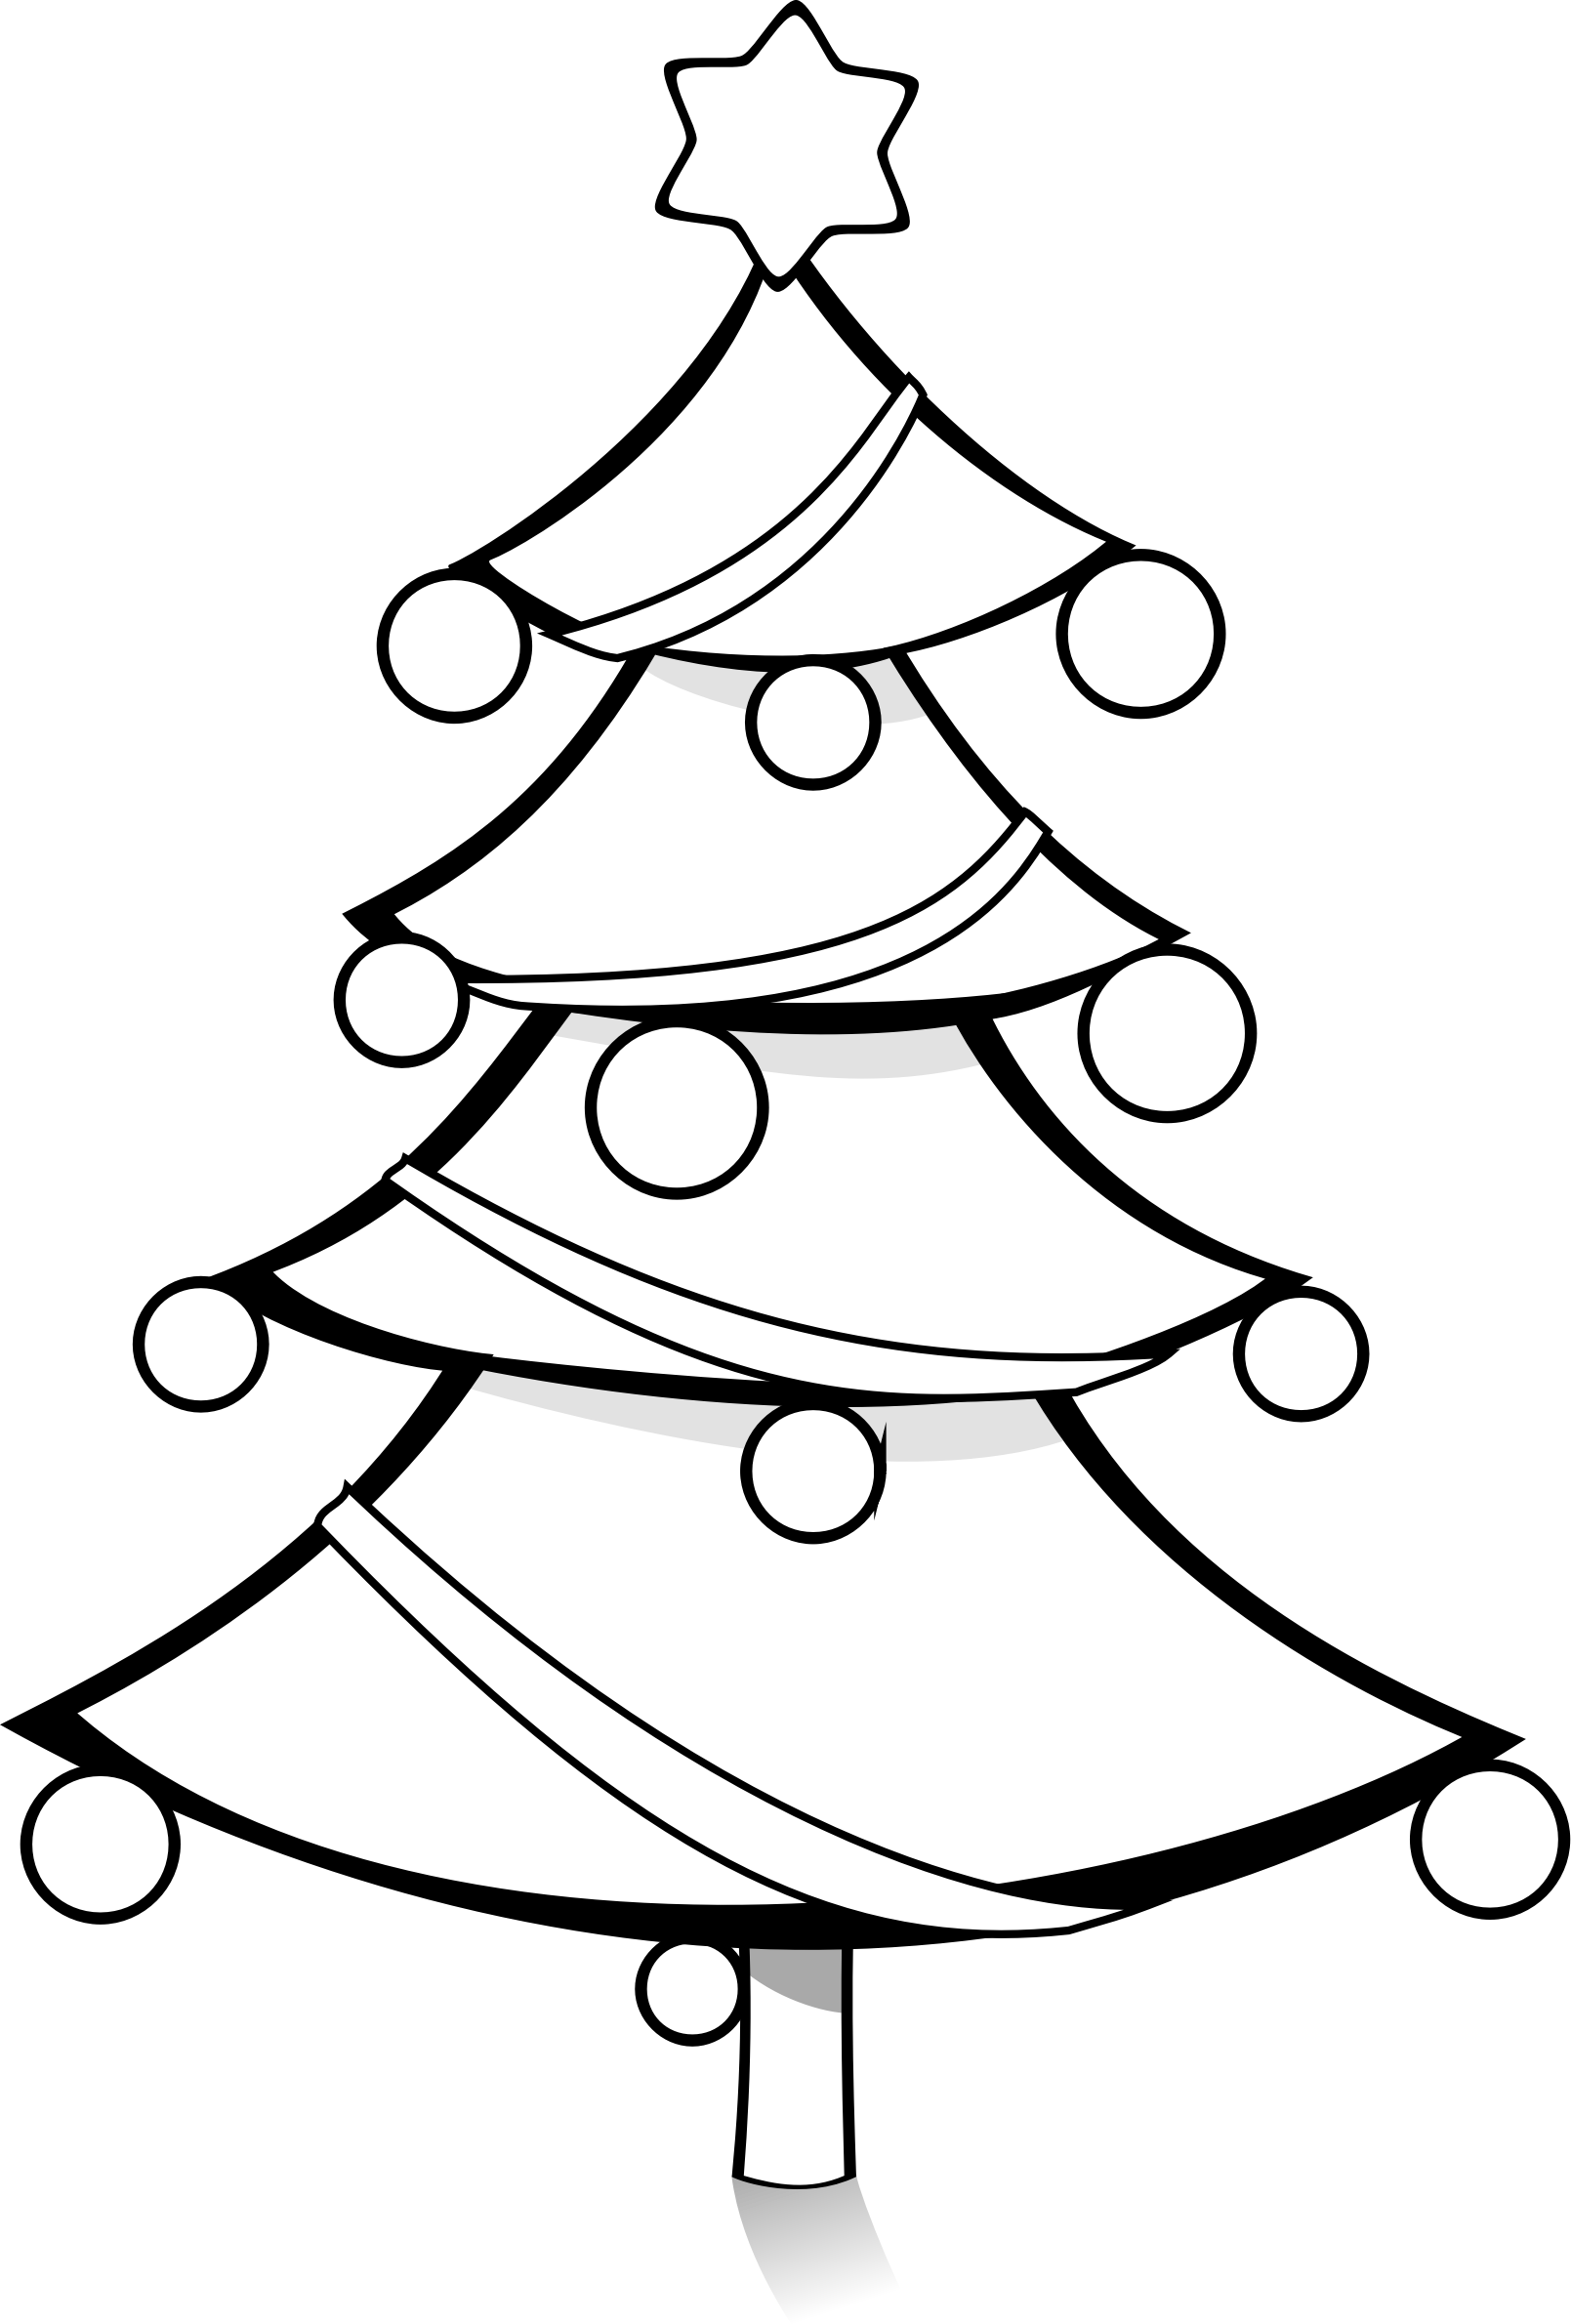 Christmas tree bw clip art clipart collection - Cliparts ... - Christmas Eve Clip Art Black and White